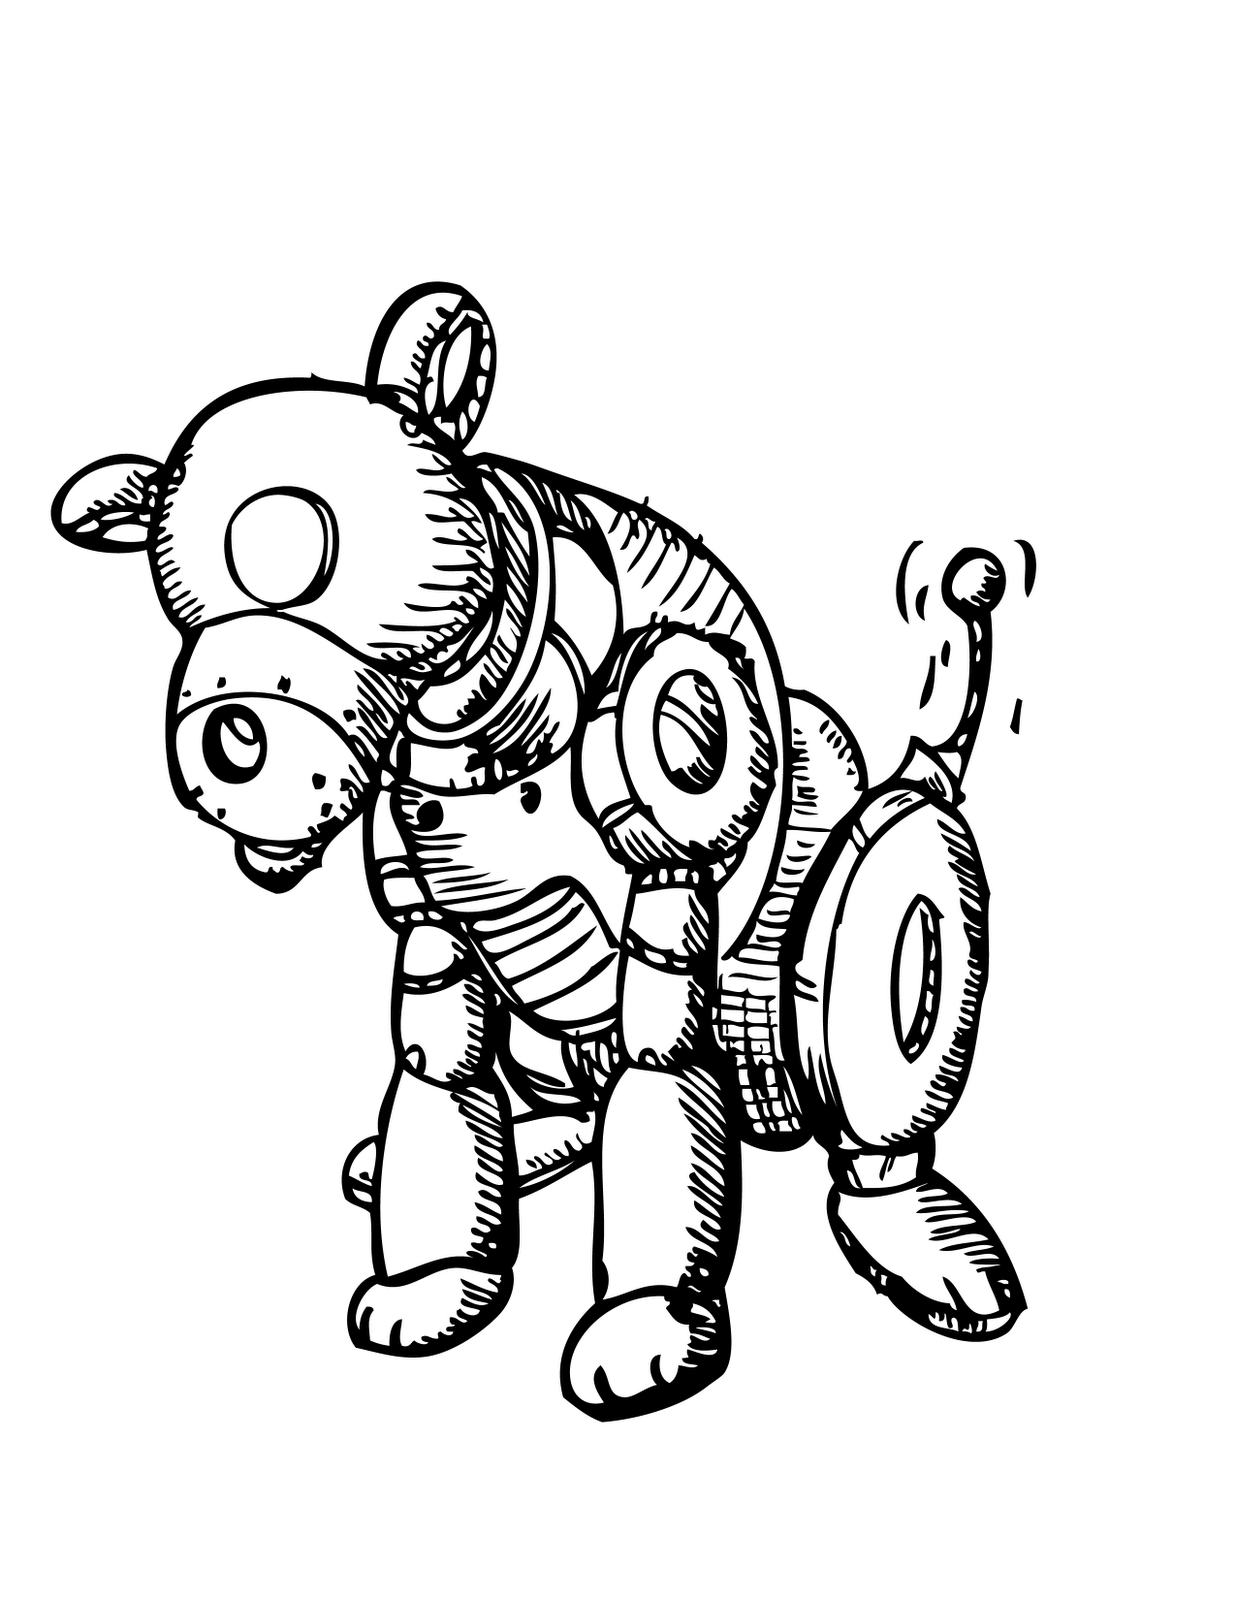 Download Simple Robot Dog Drawings Sketch Coloring Page